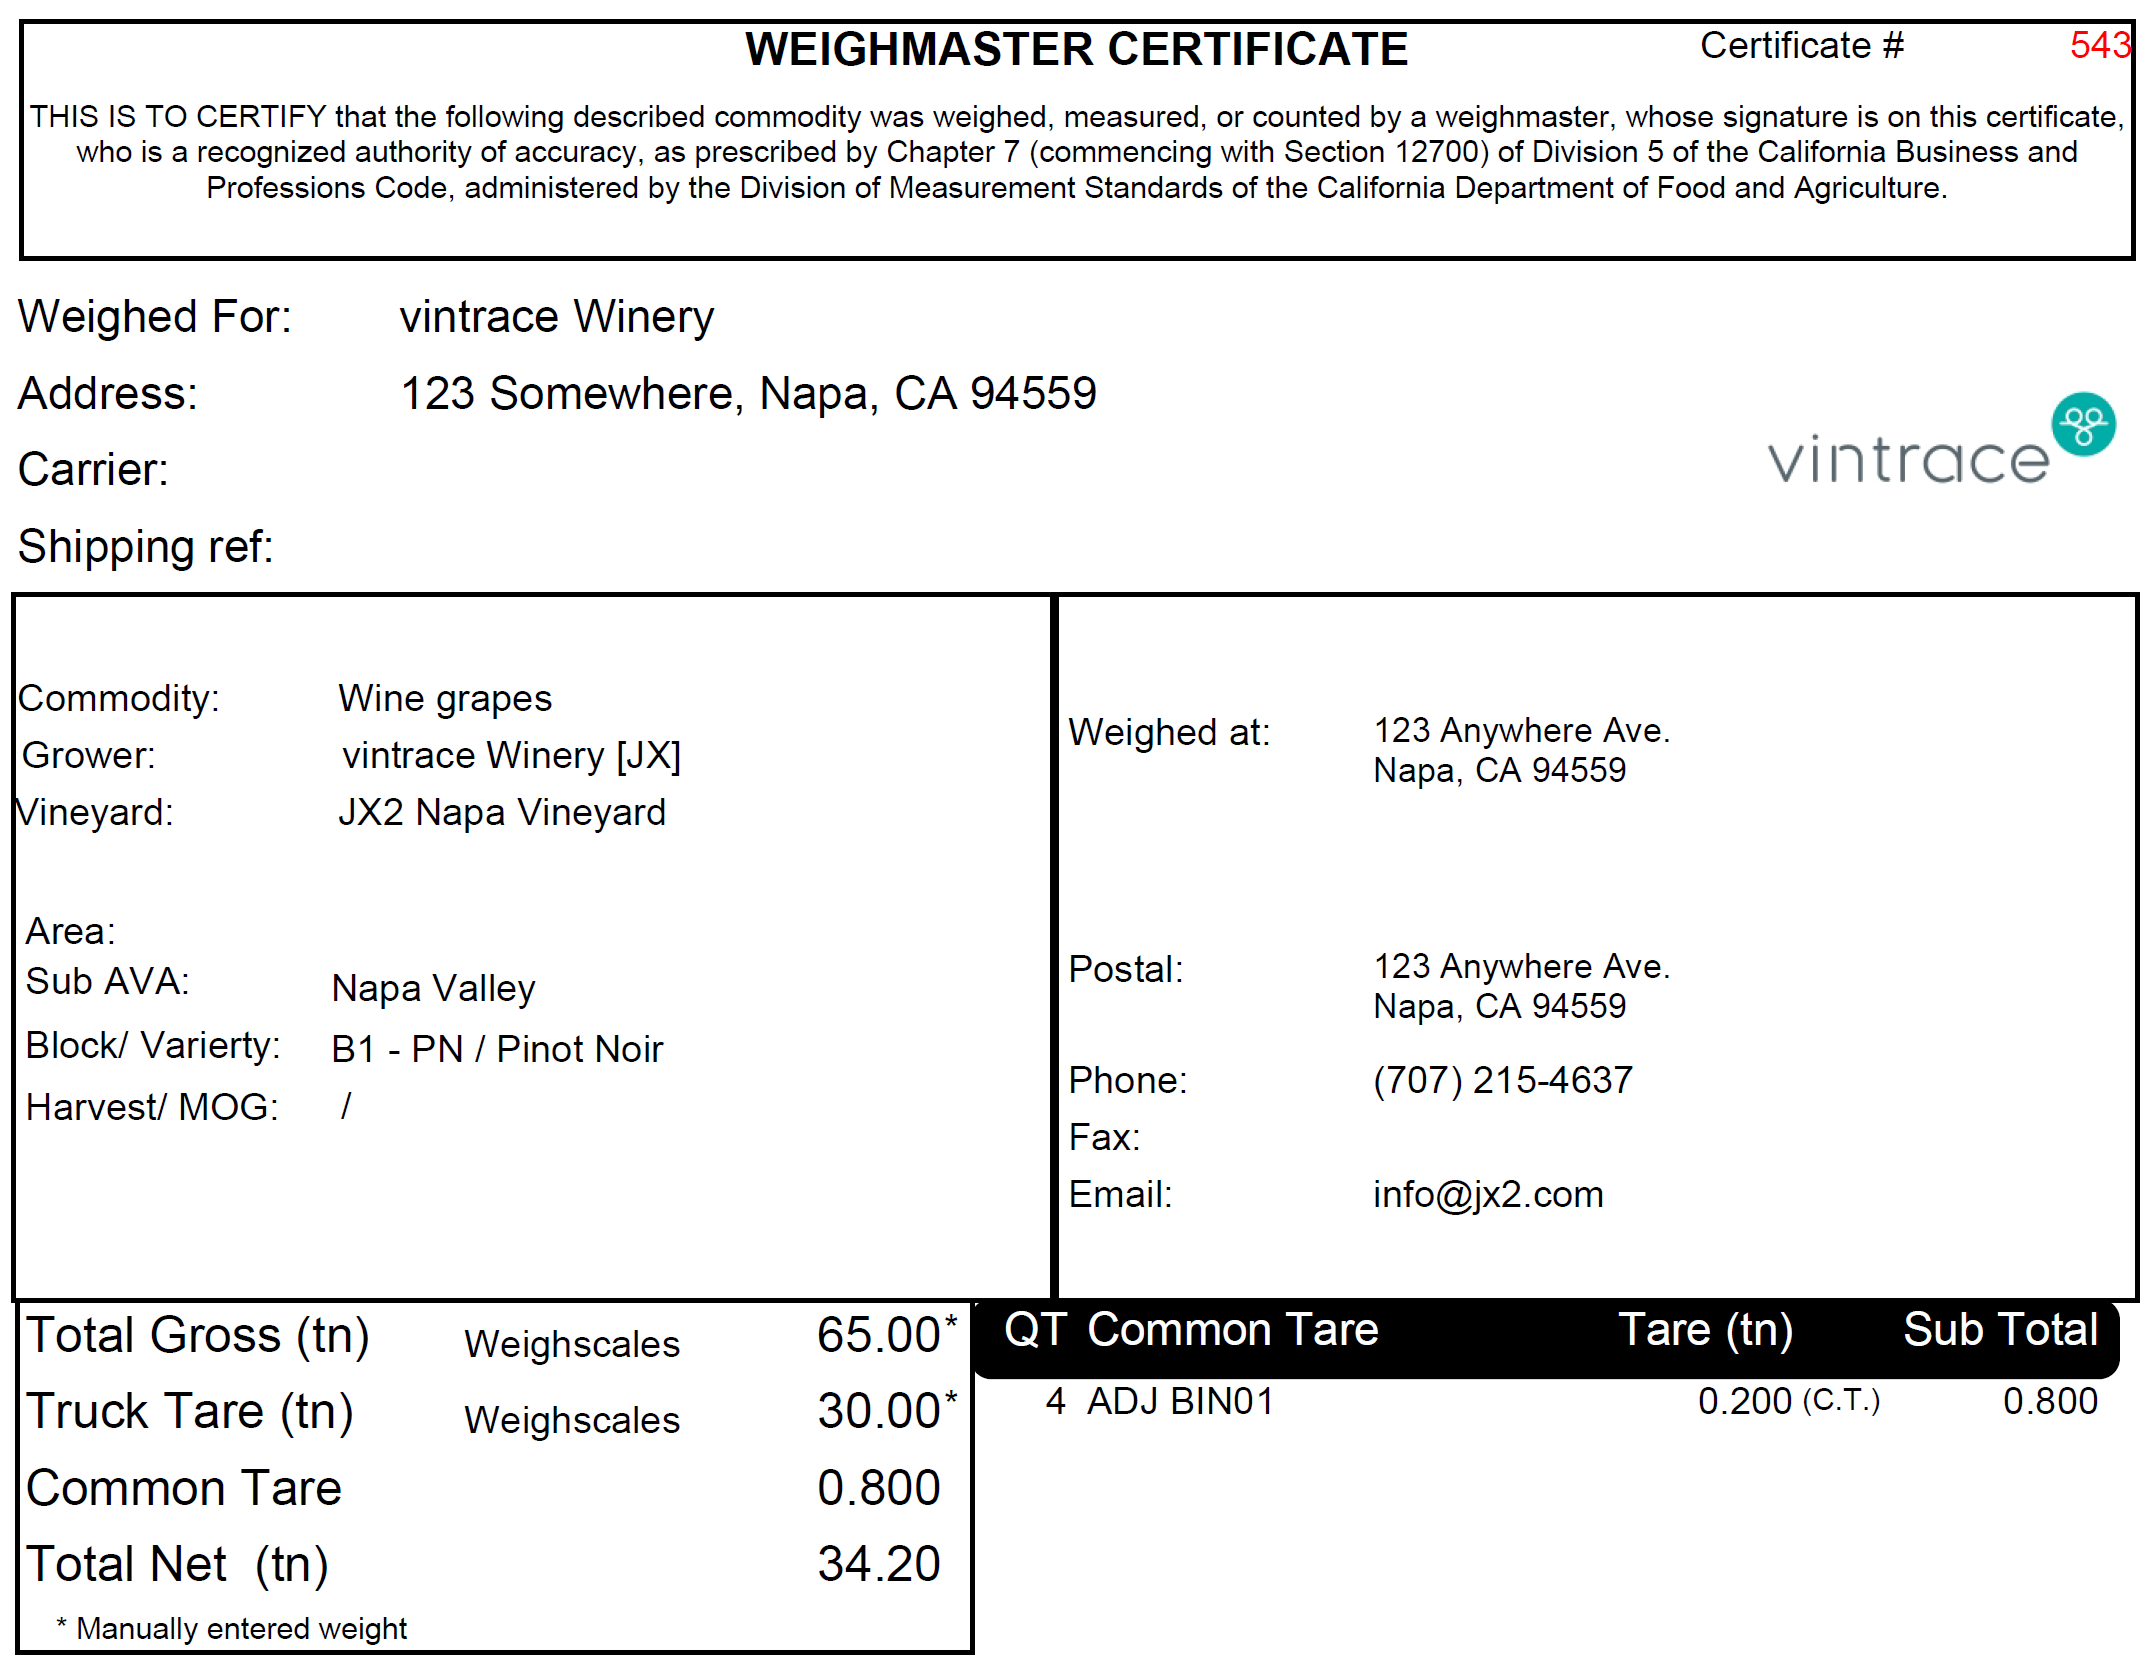 Weighmaster Certificate 20231130.png